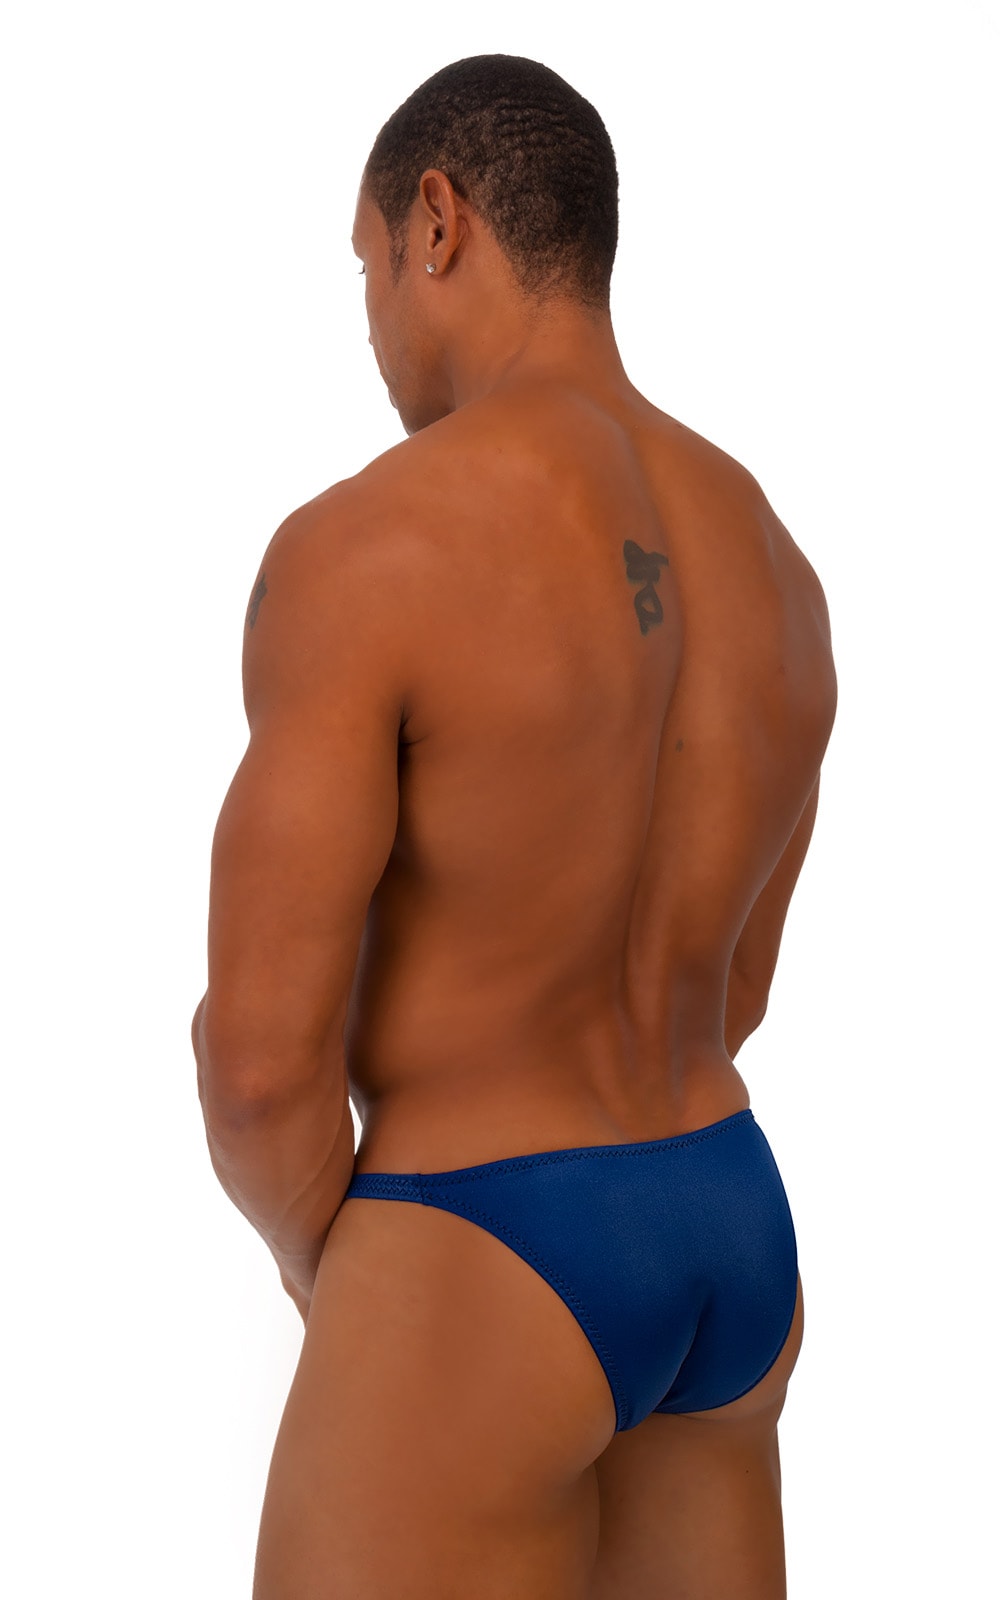 Posing Suit - Competition Bikini Cut in Navy Blue, Rear View